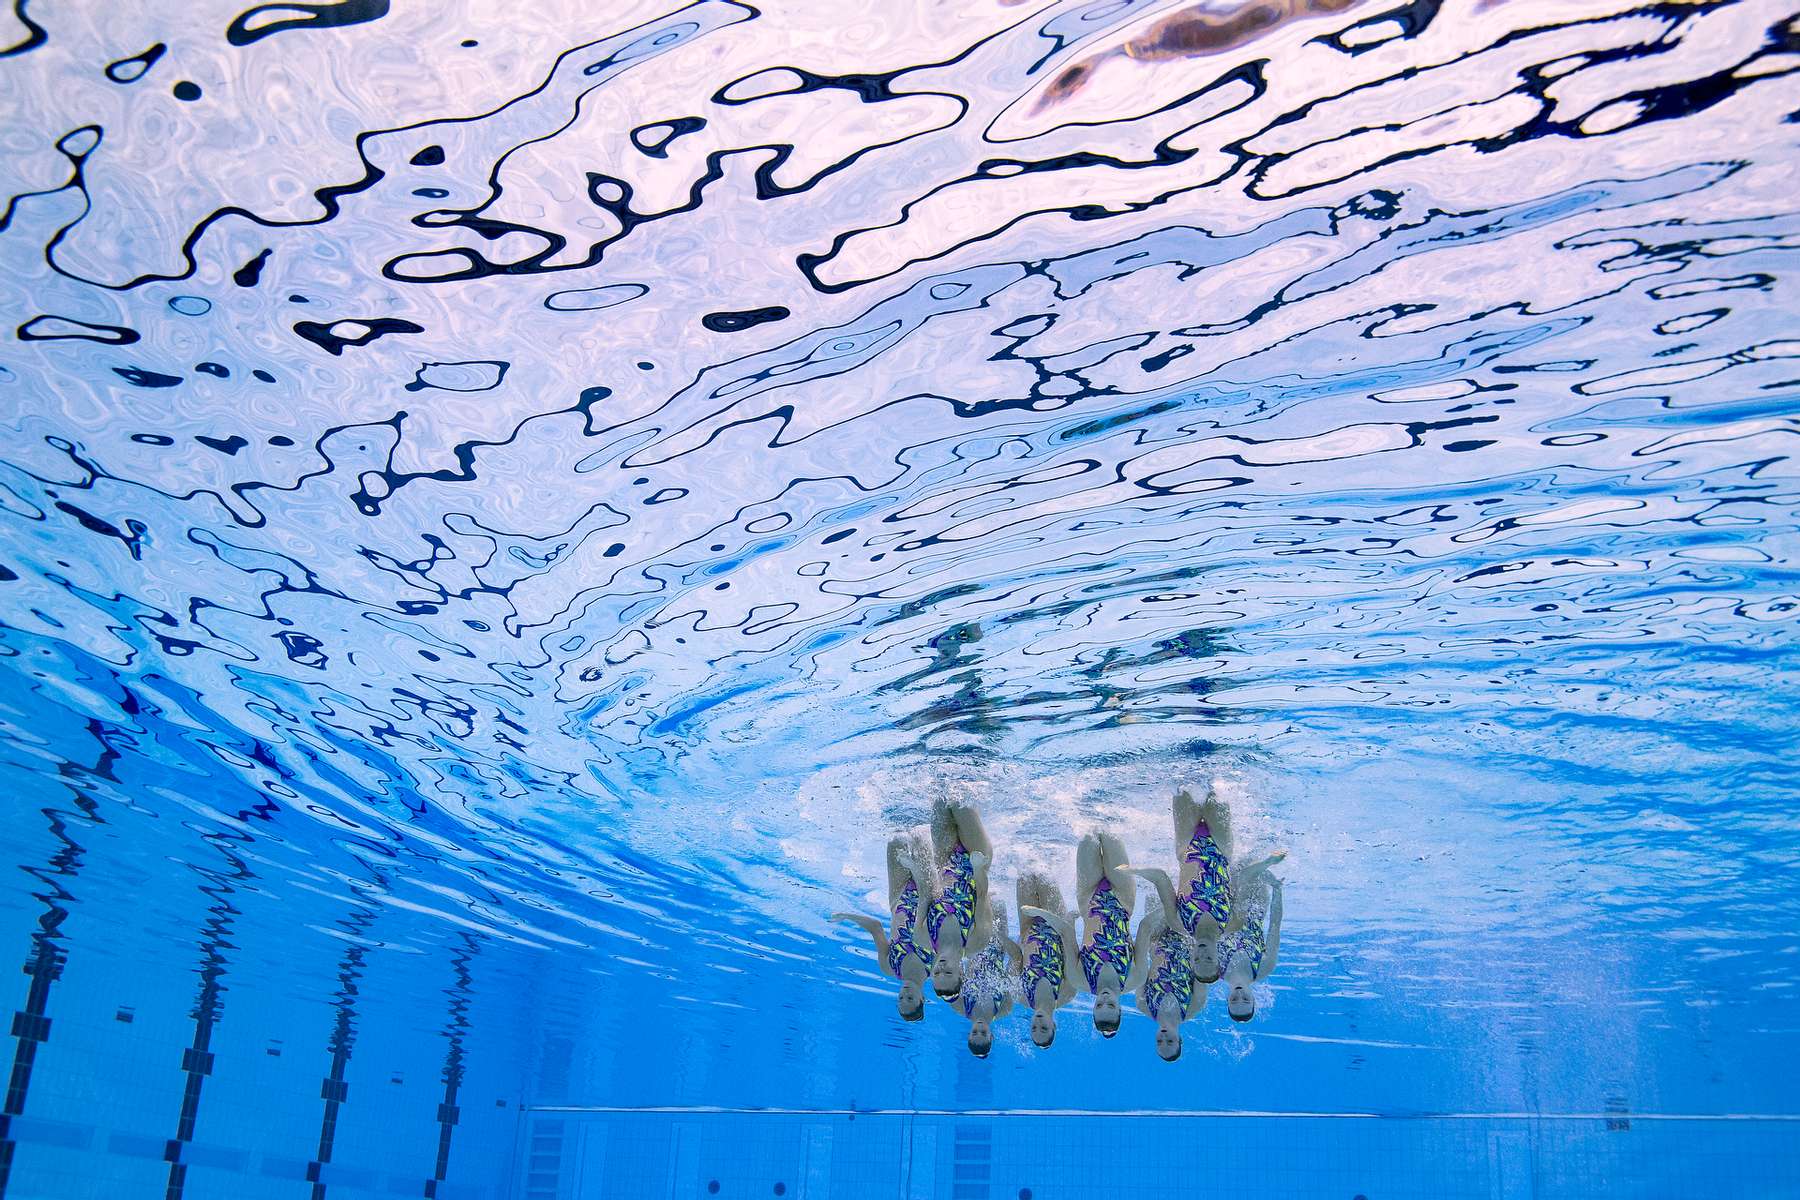 Team Canada compete in the Artistic Swimming Team Technical Routine on day fourteen of the Tokyo 2020 Olympic Games at Tokyo Aquatics Centre on August 06, 2021 in Tokyo, Japan.